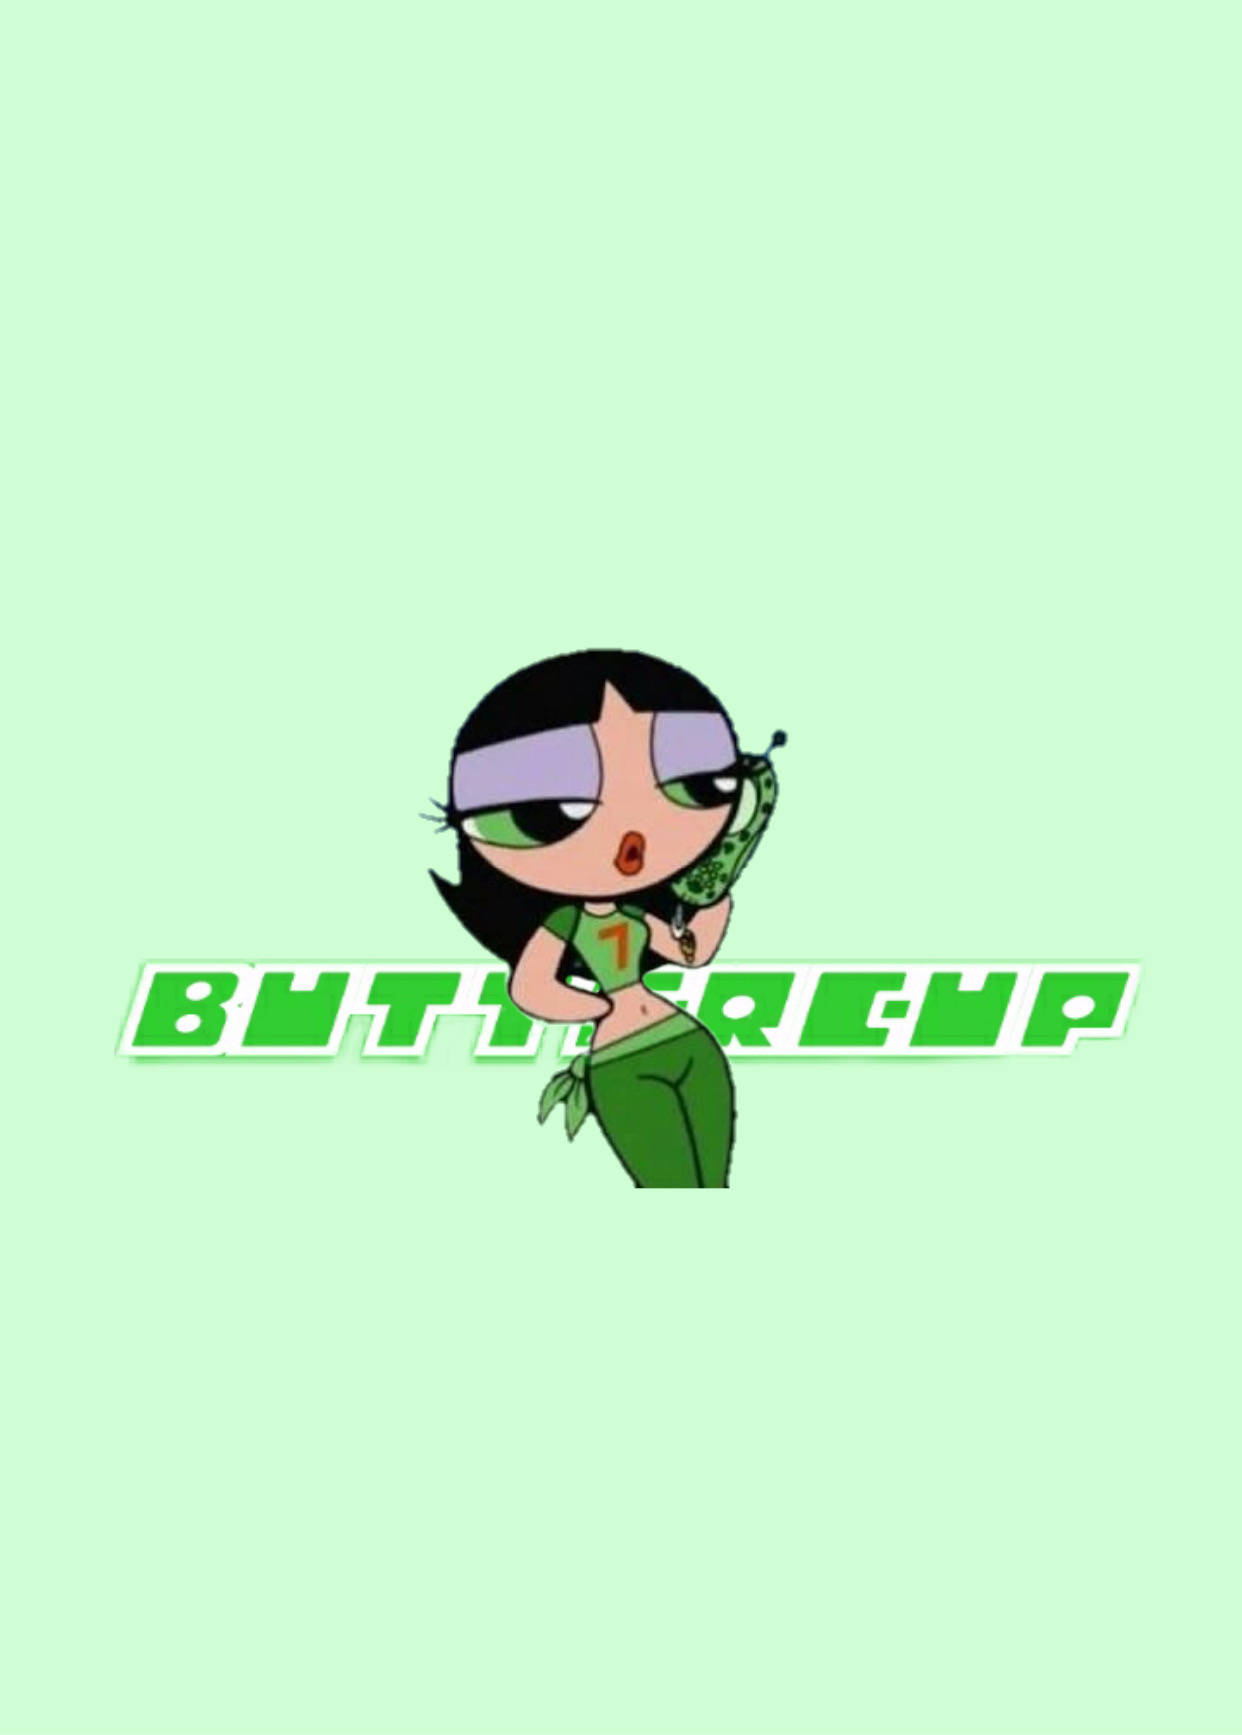 The iconic Black Powerpuff Girl, Buttercup, showcasing her fierce and determined persona in a stunning portrait. Wallpaper